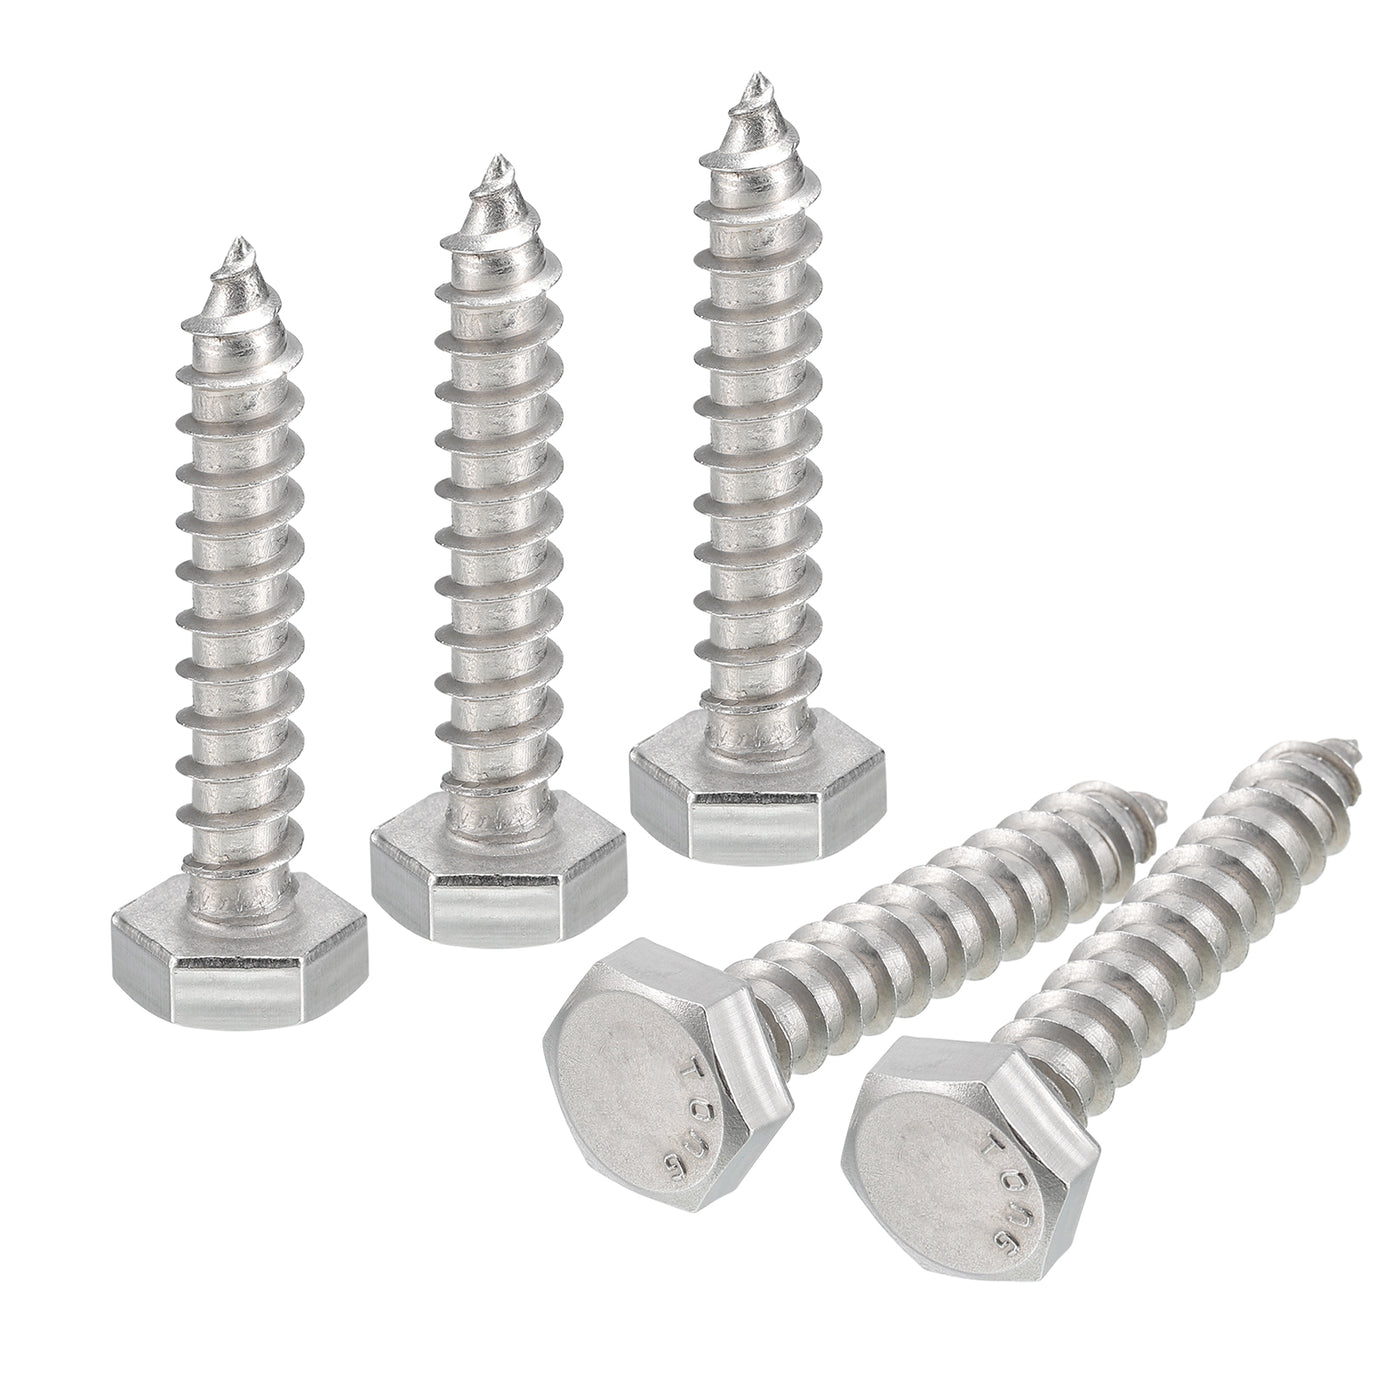 uxcell Uxcell Hex Head Lag Screws Bolts, 25pcs 1/4" x 1-1/2" 304 Stainless Steel Wood Screws